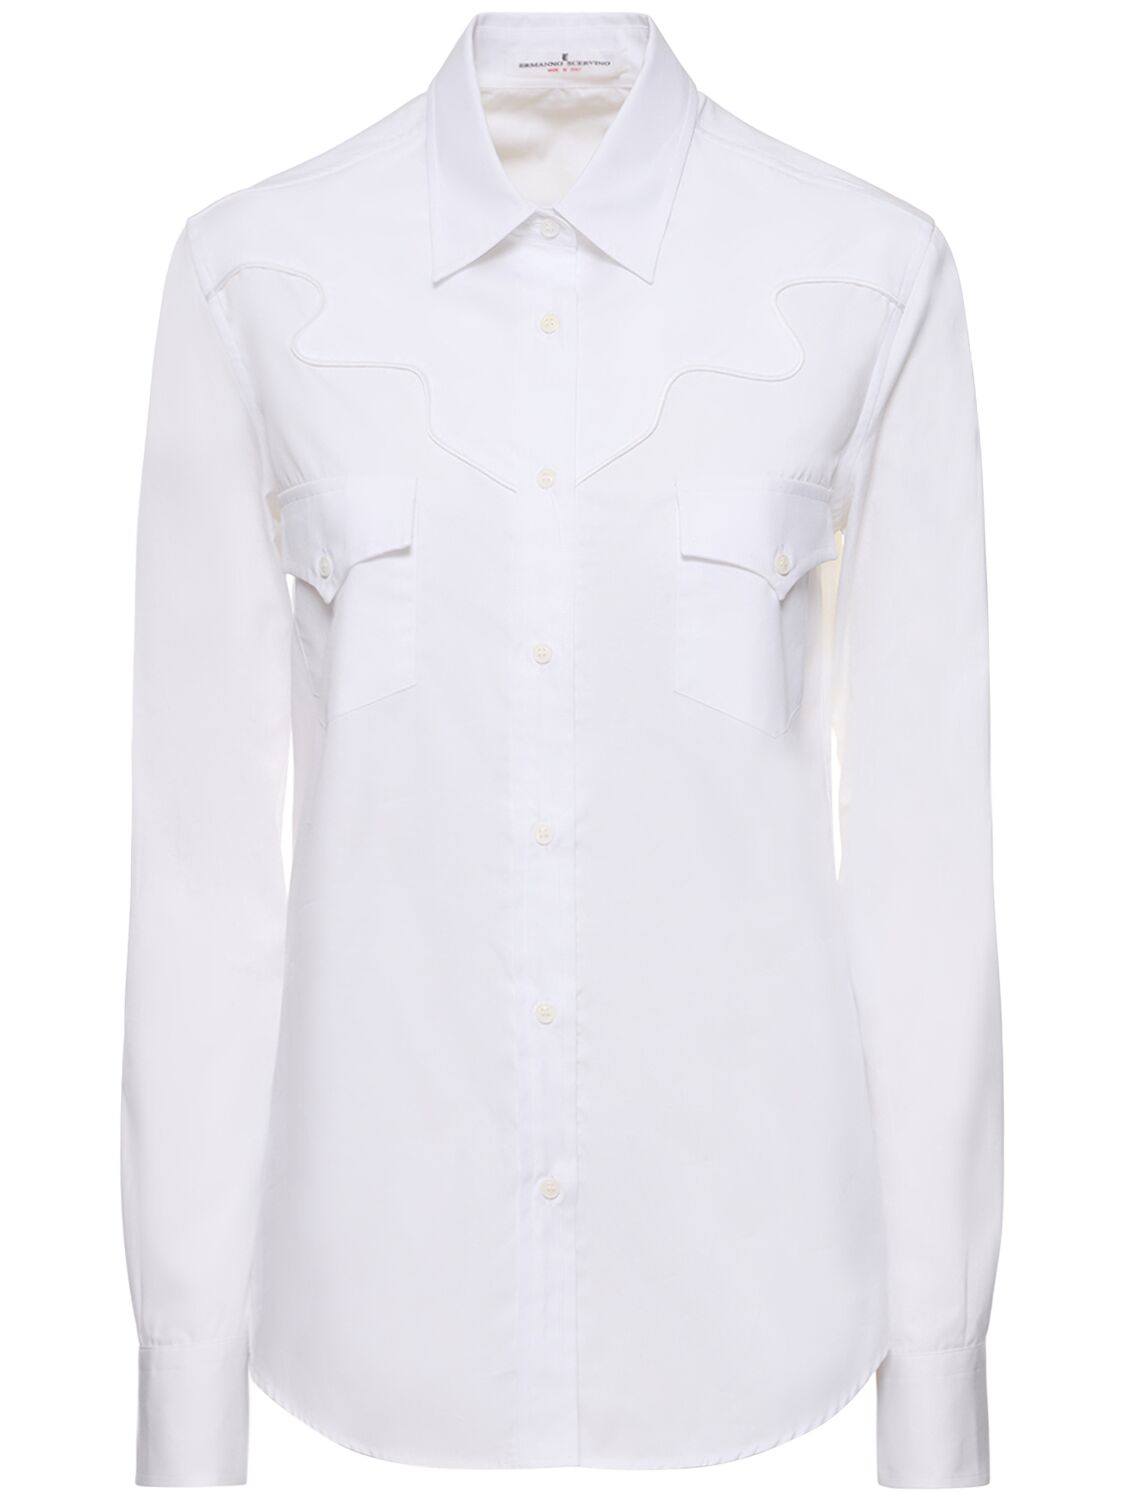 Image of Buttoned Shirt W/ Breast Pockets